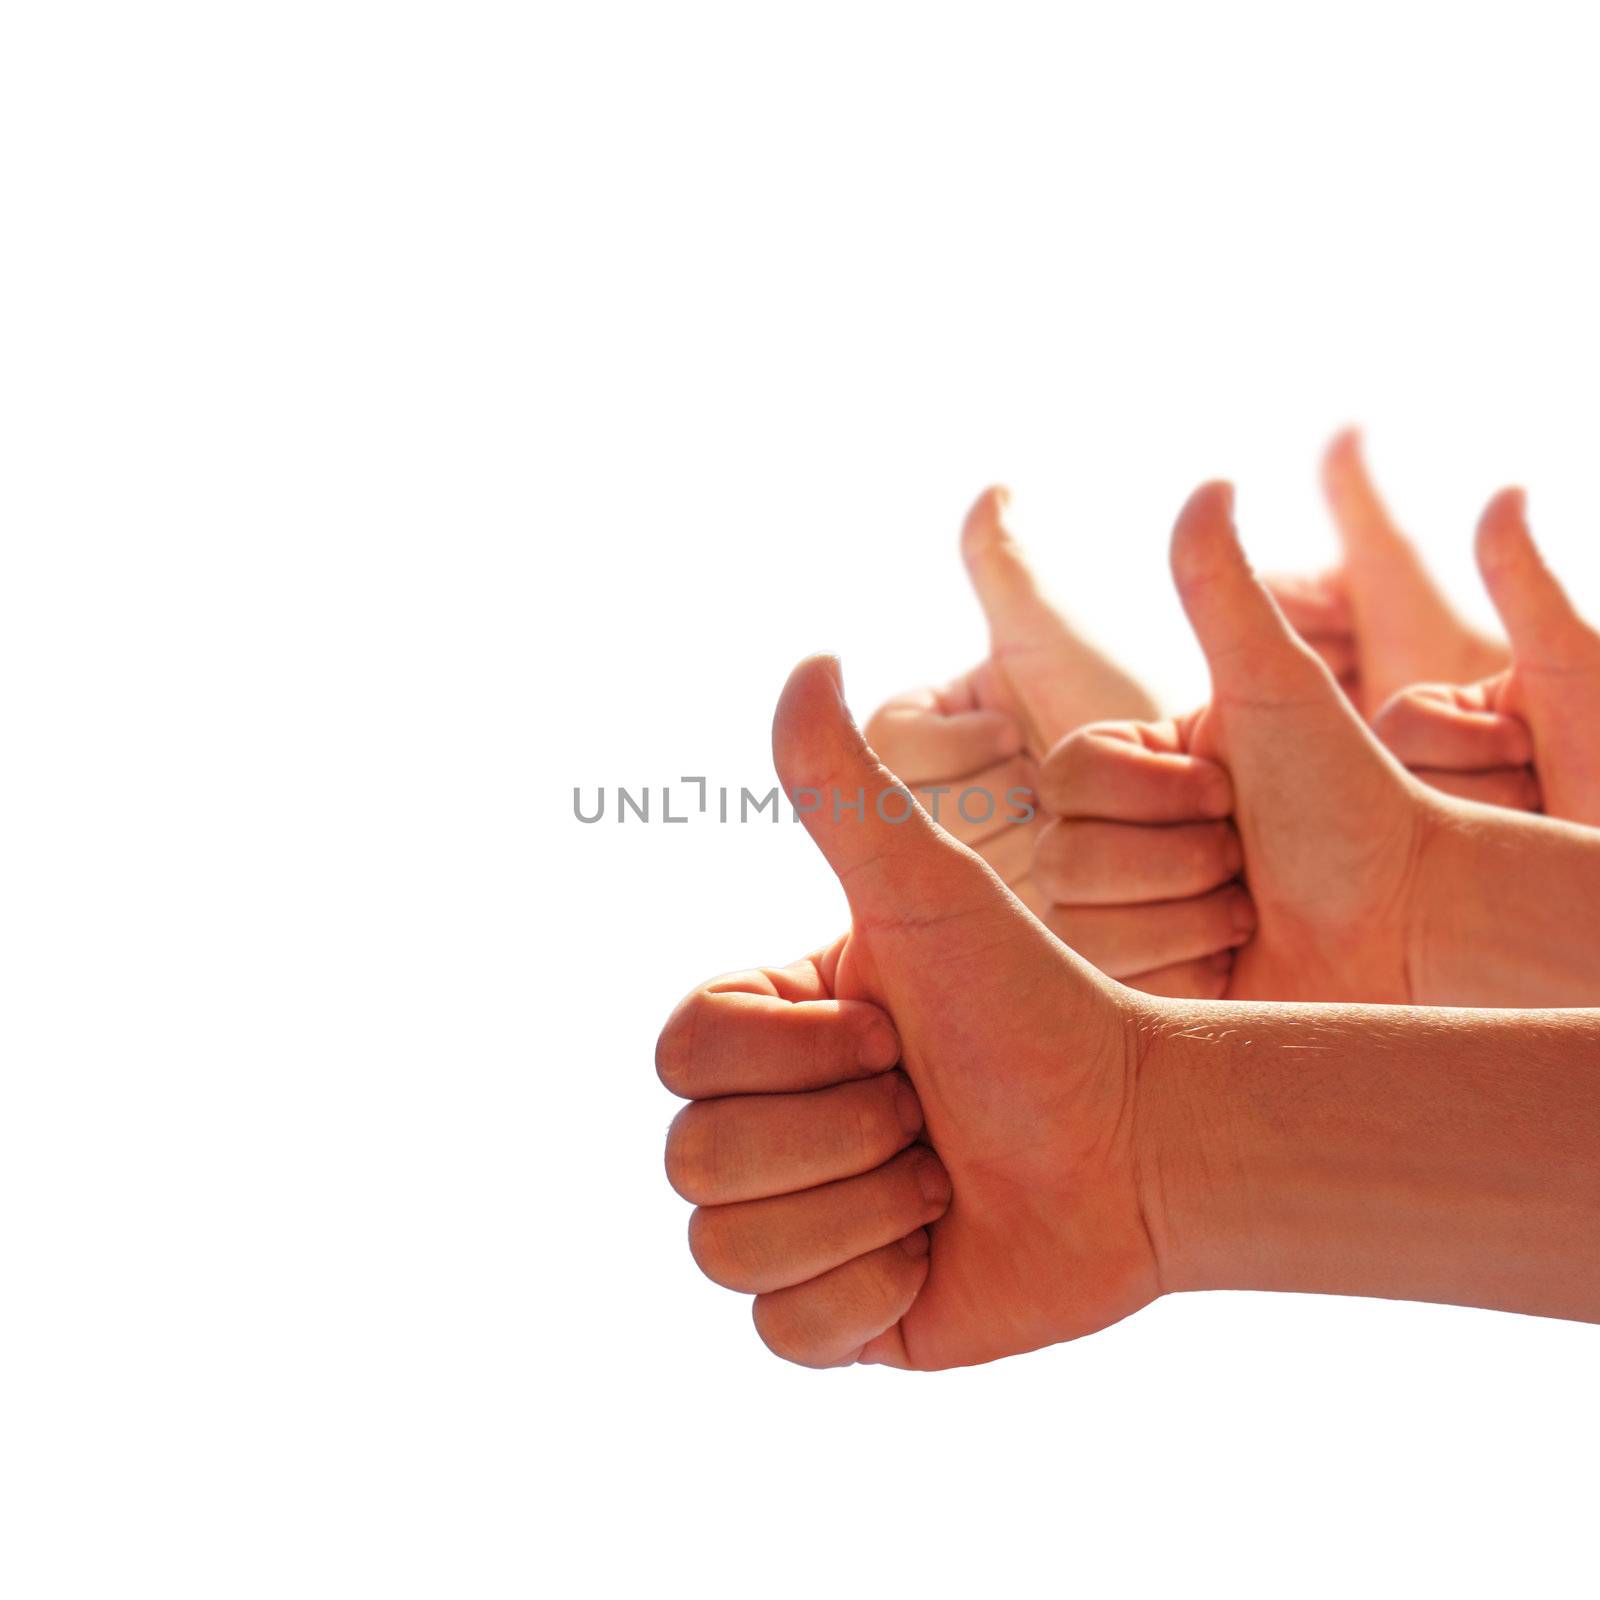 thumbs up on white background by photochecker